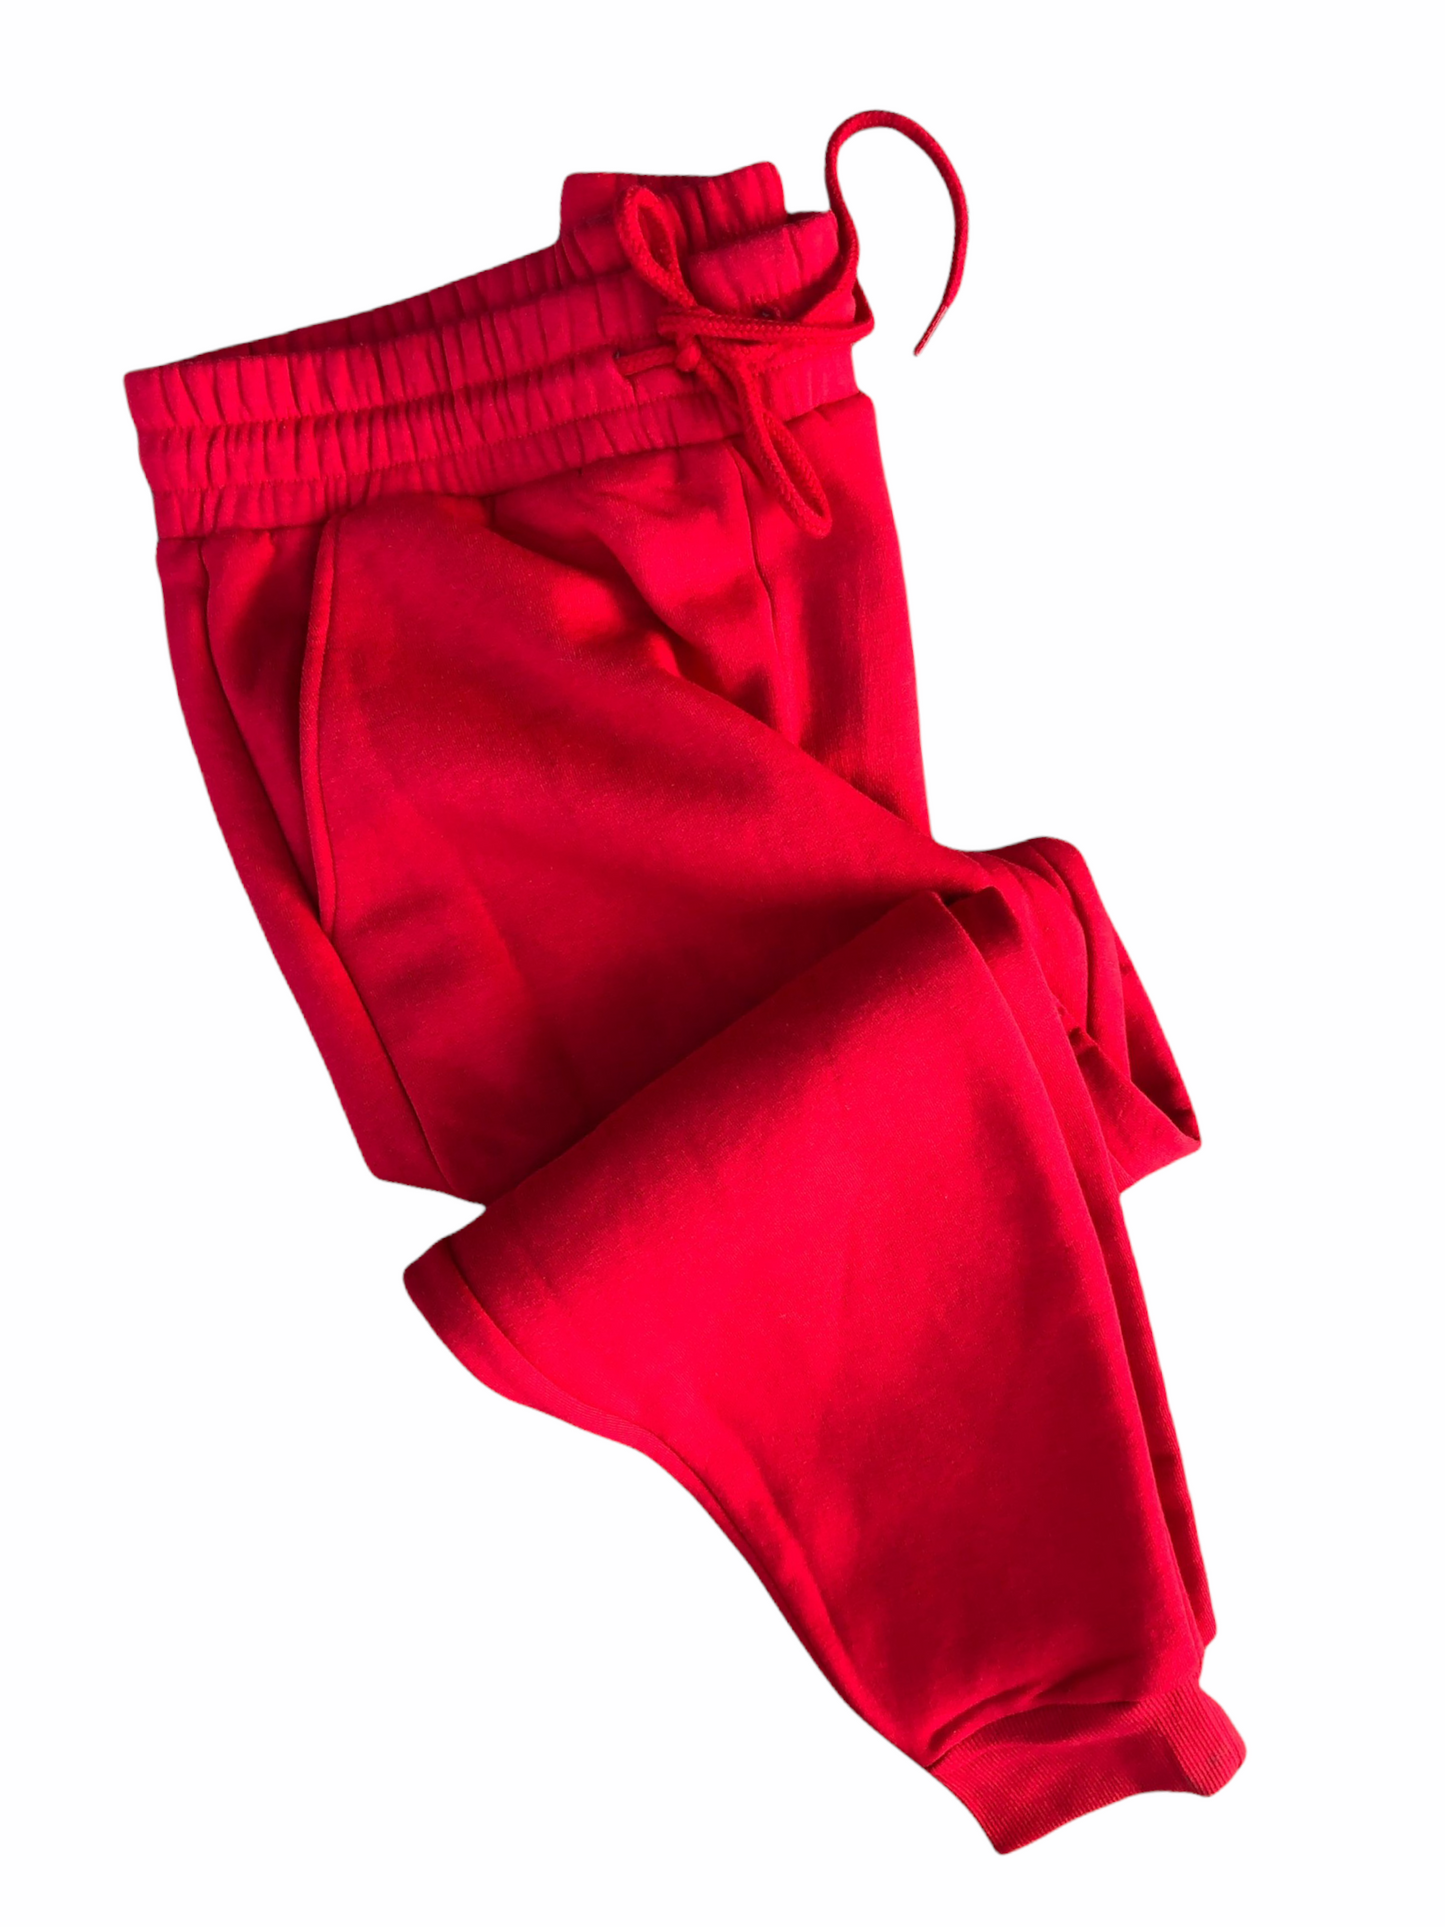 Tyler joggers (red)